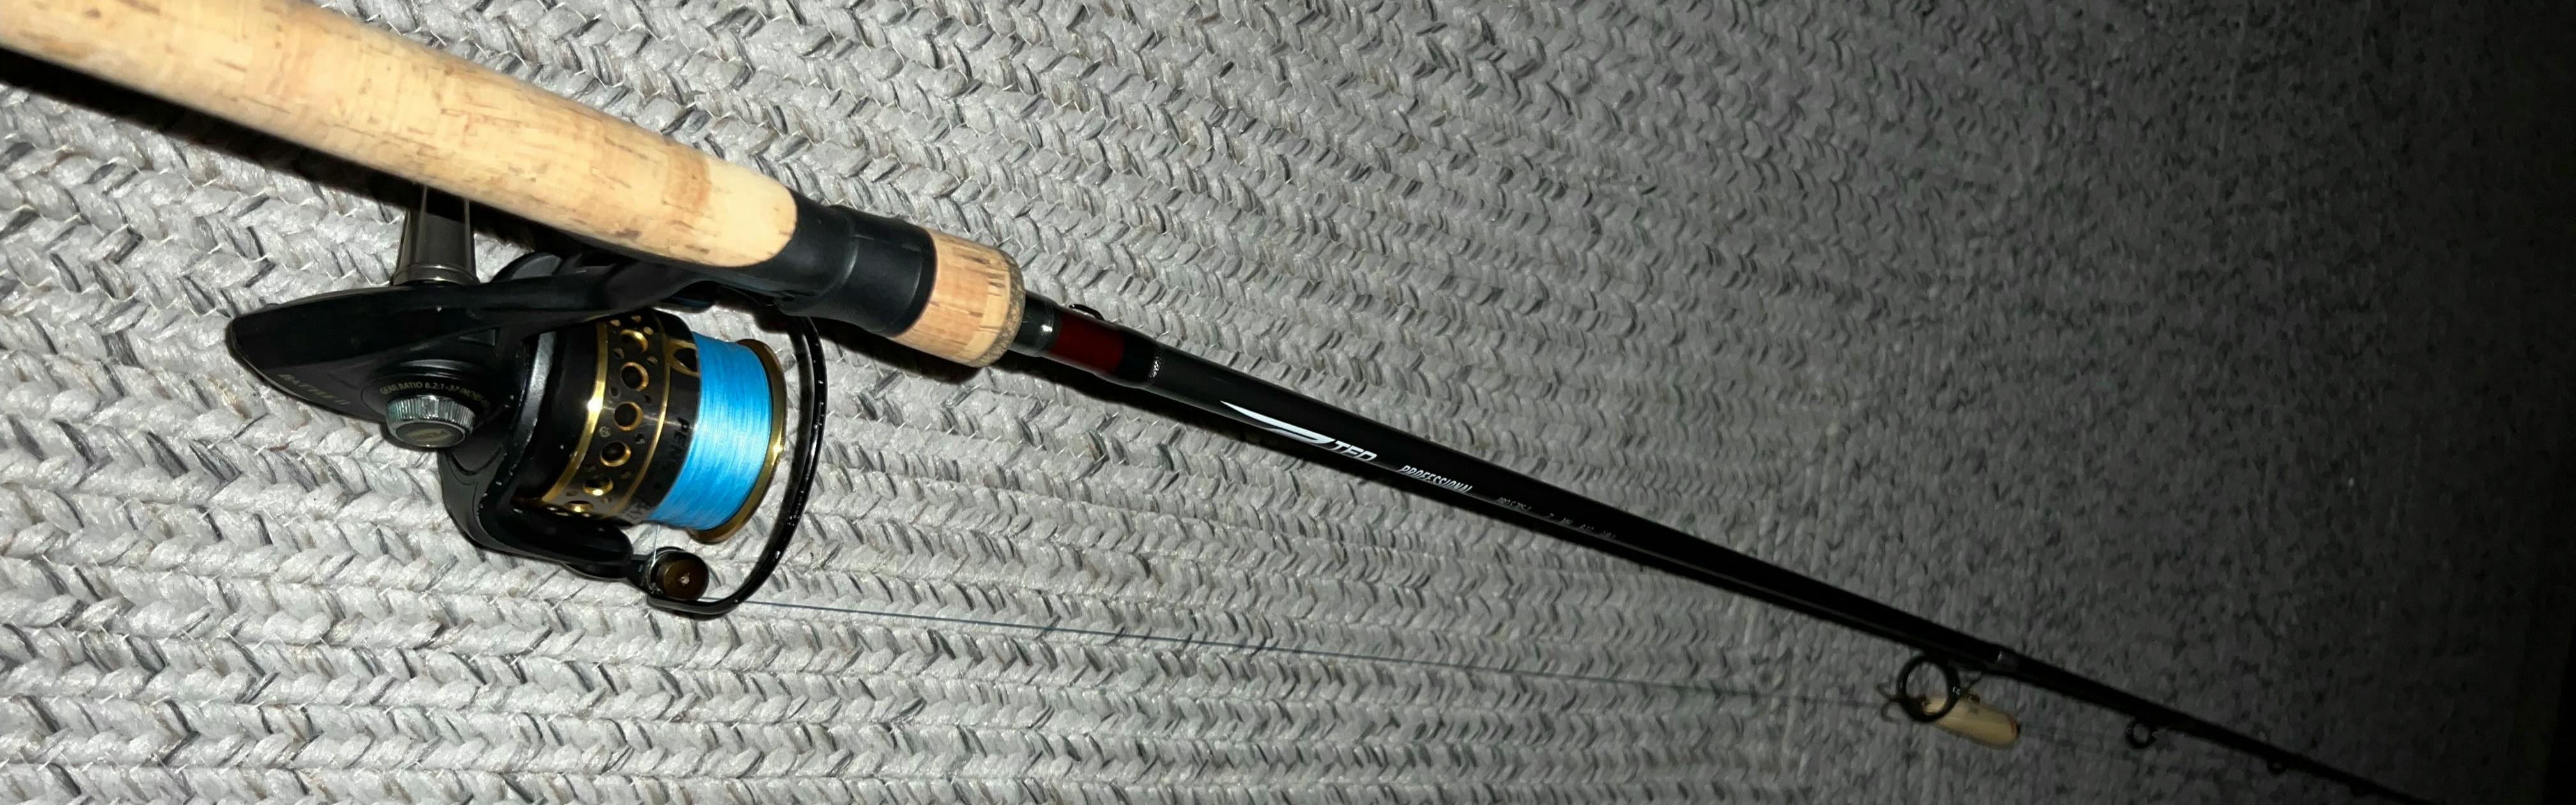 TEMPLE FORK OUTFITTERS NXT Black Label Fly Rod Outfit - Great